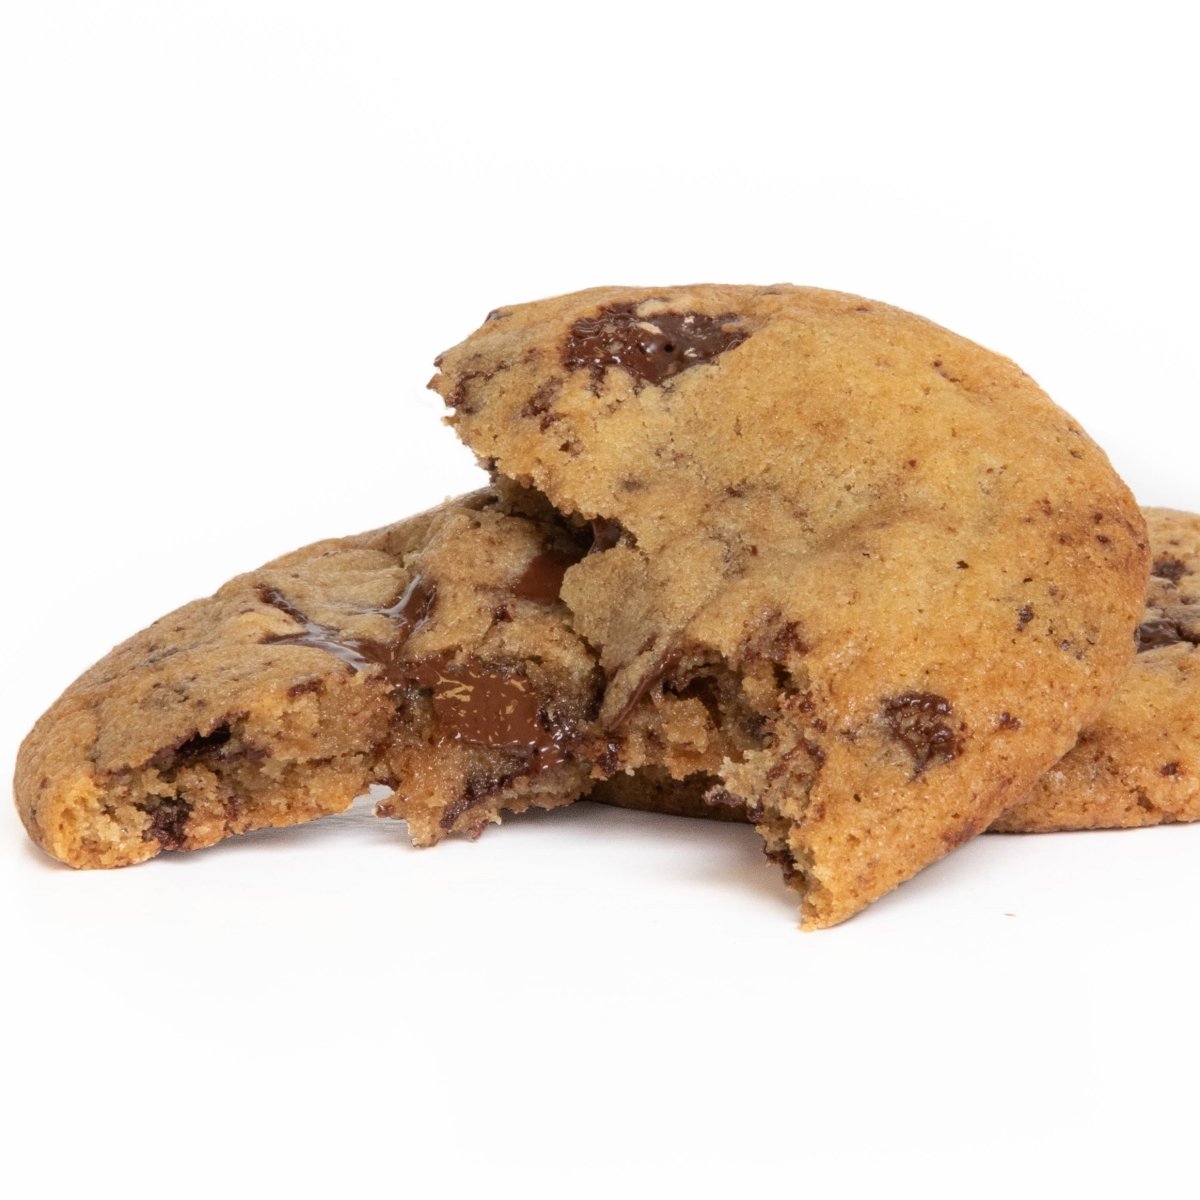 The Gearharts Chocolate Chip Cookie - Gearharts Fine Chocolates